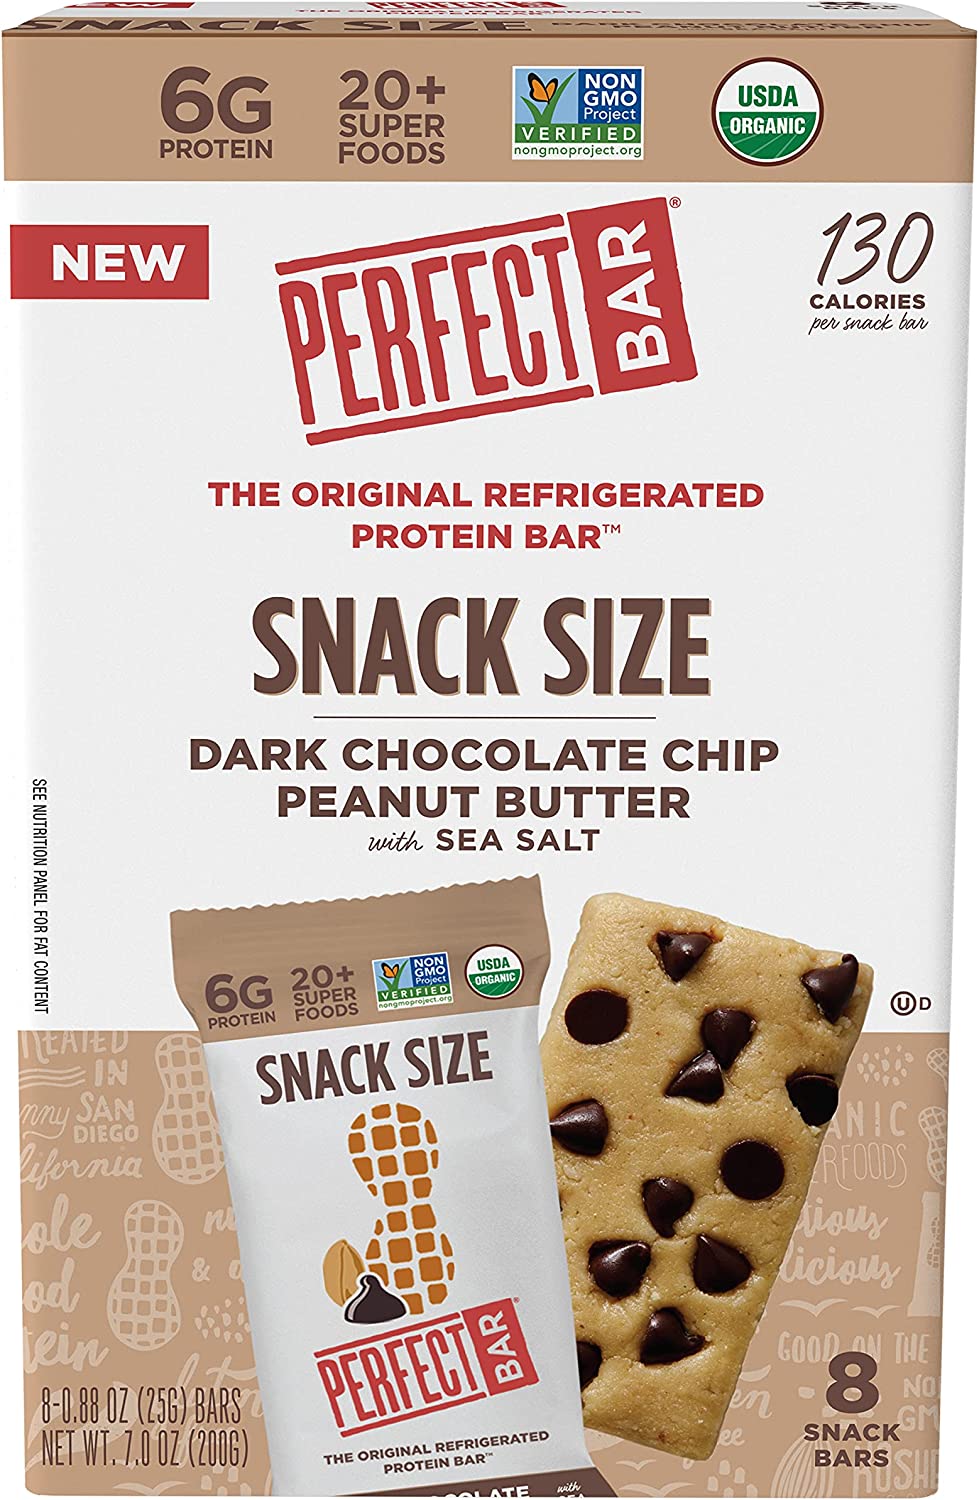 Perfect Bar Snack Size Refrigerated Protein Bar, Dark Chocolate Chip Peanut Butter, 0.88 Oz, 8 Count